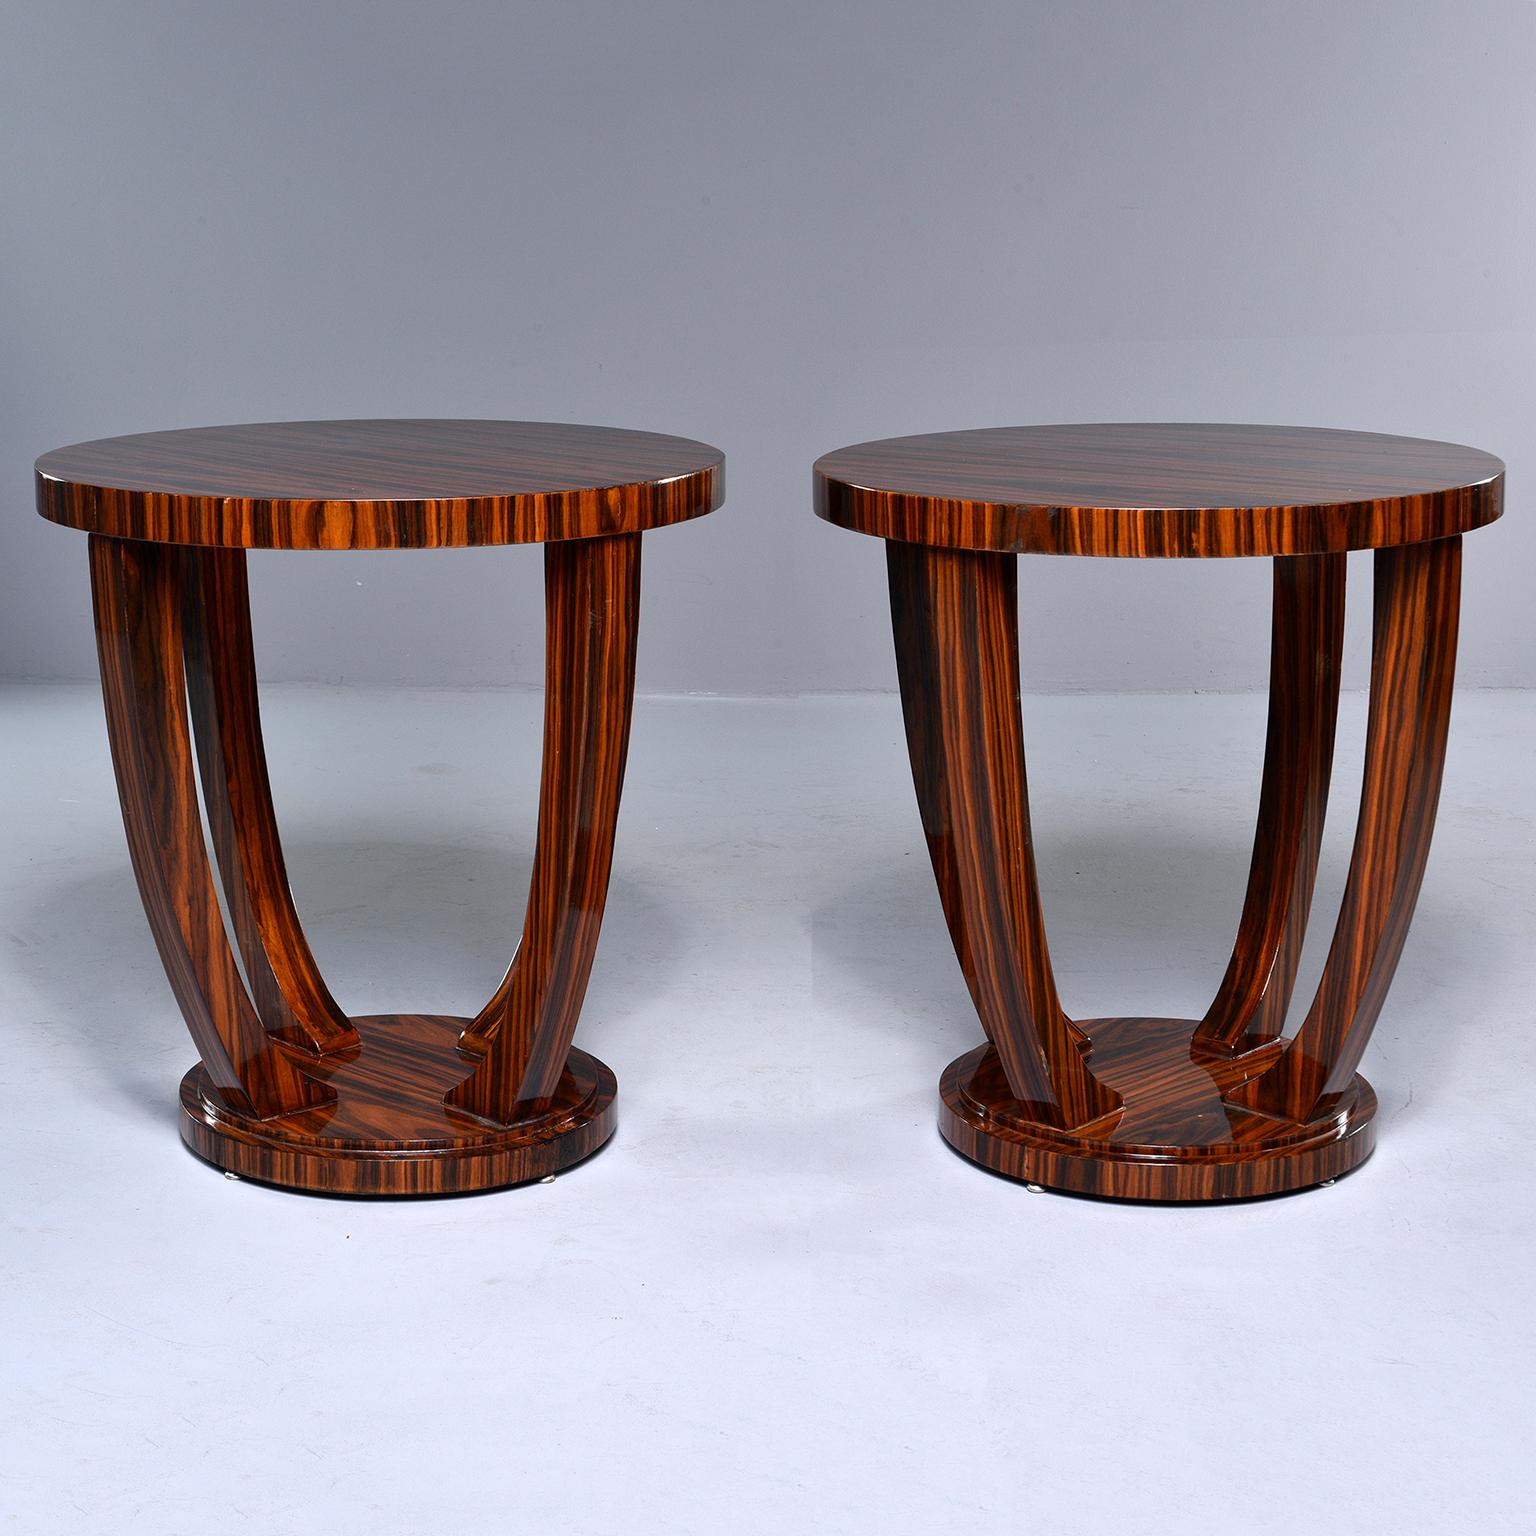 French Pair of Art Deco Style Palisander Round Side Tables